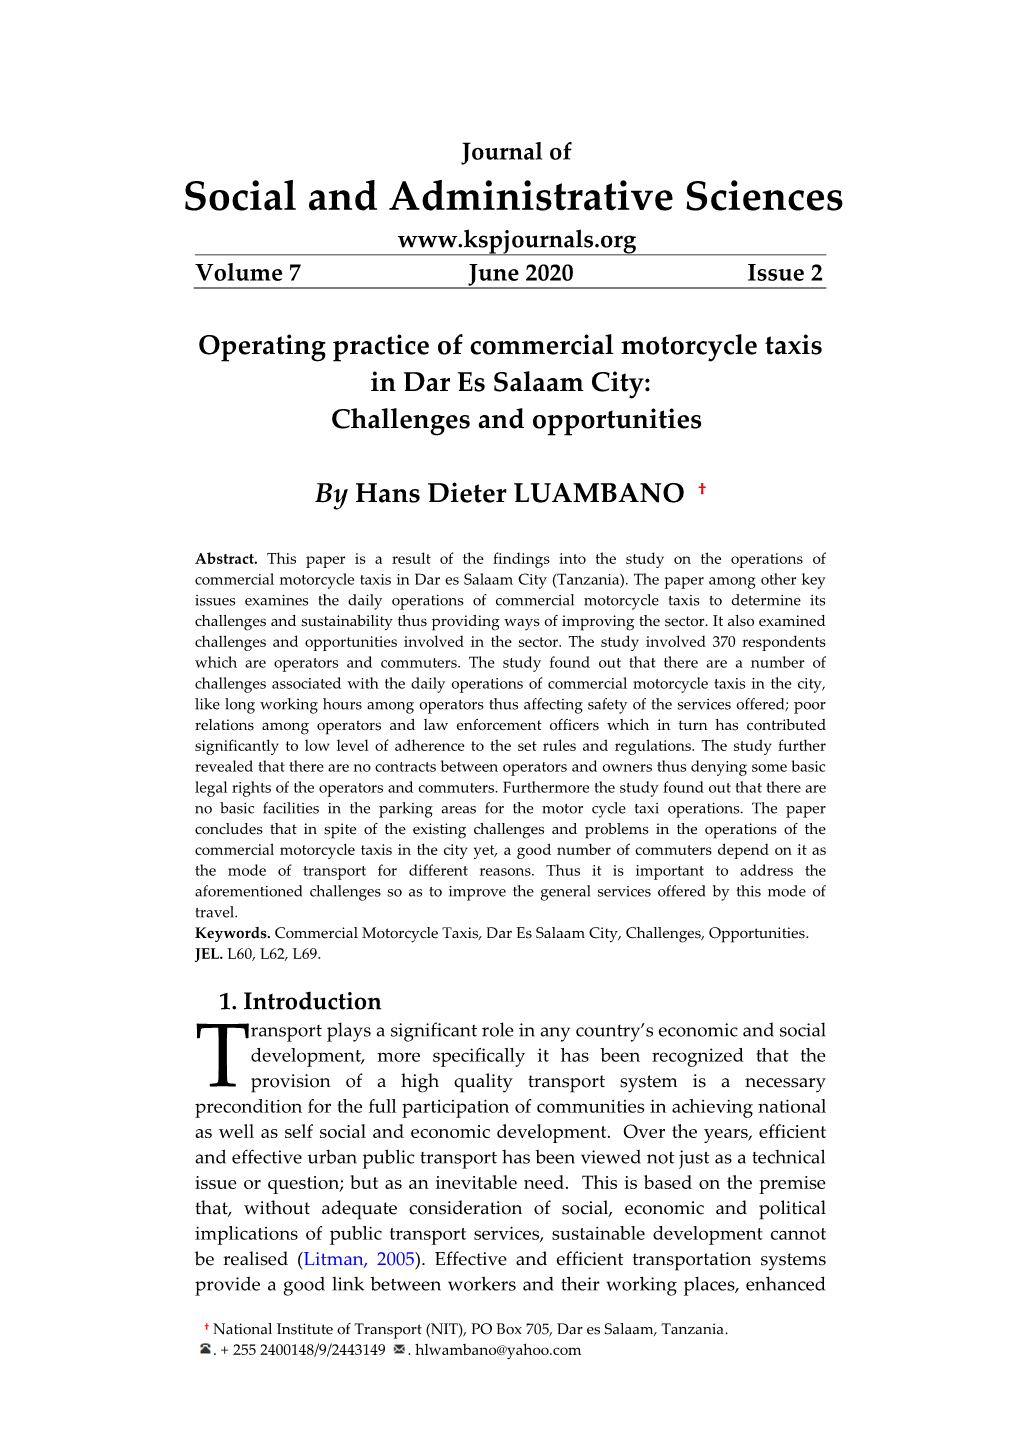 Social and Administrative Sciences Volume 7 June 2020 Issue 2